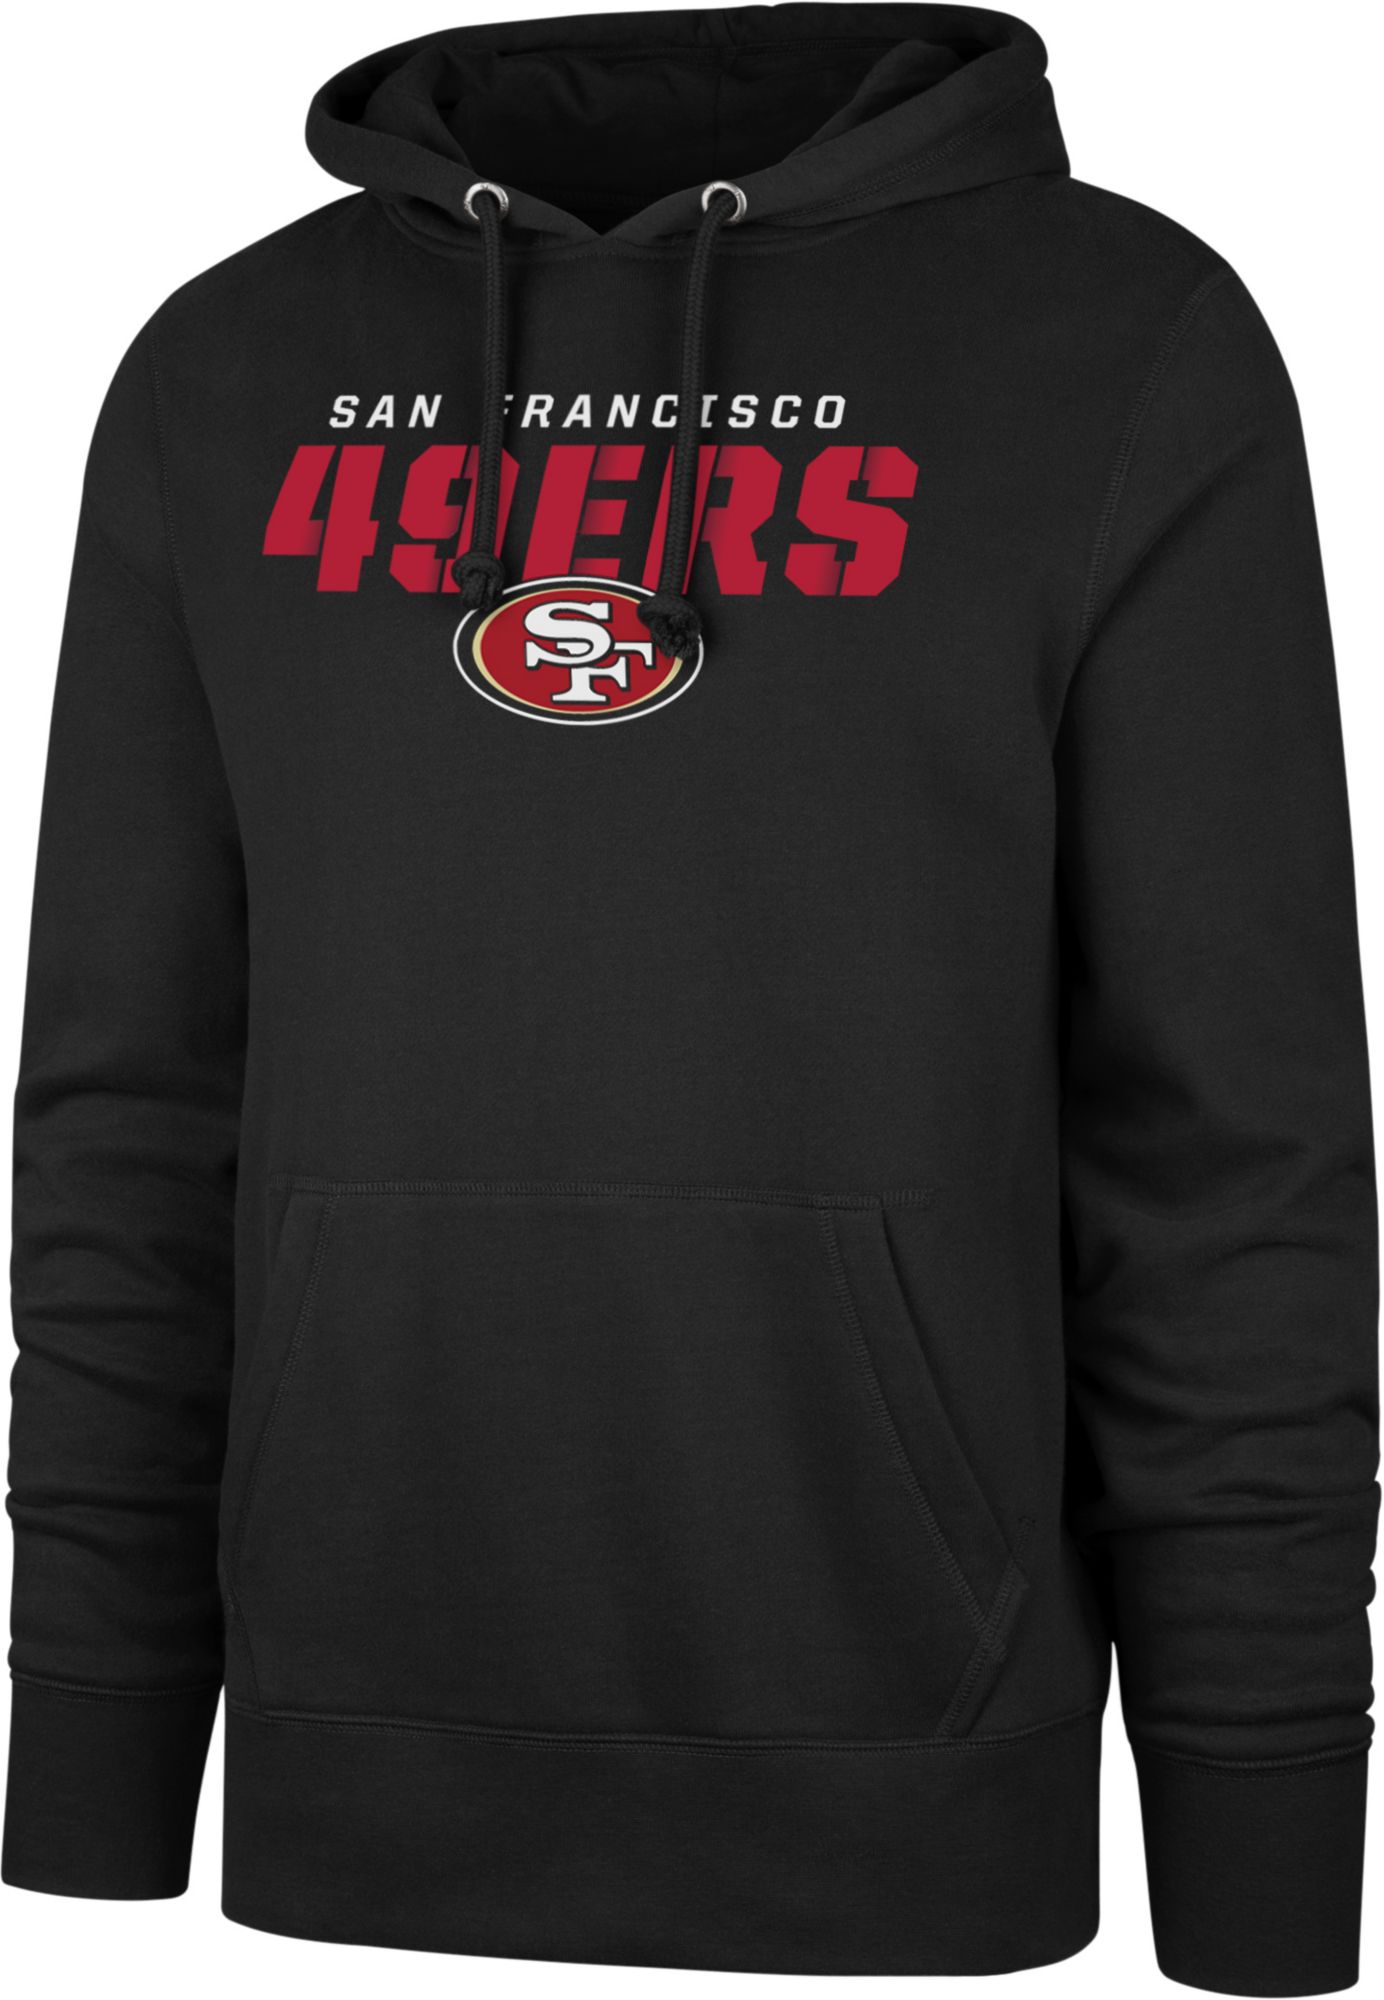 Men's San Francisco 49ers Traction Black Pullover Hoodie